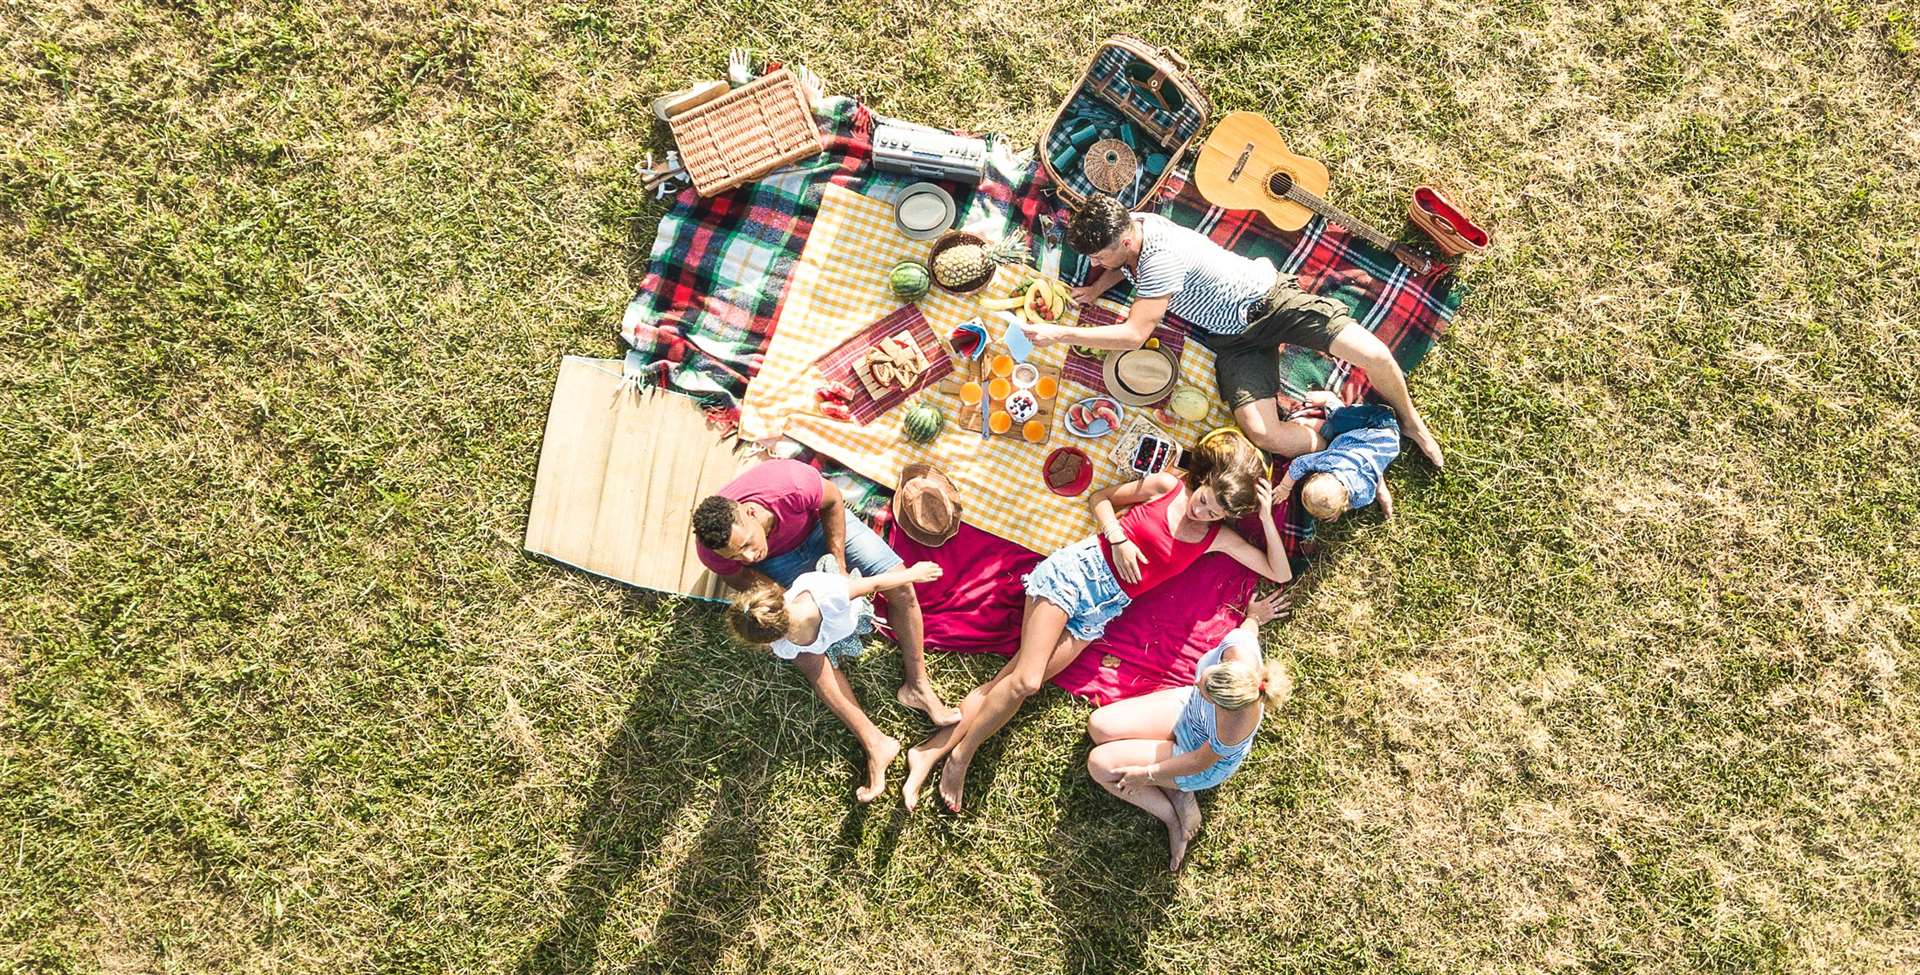 Take a picnic for Music on the Green